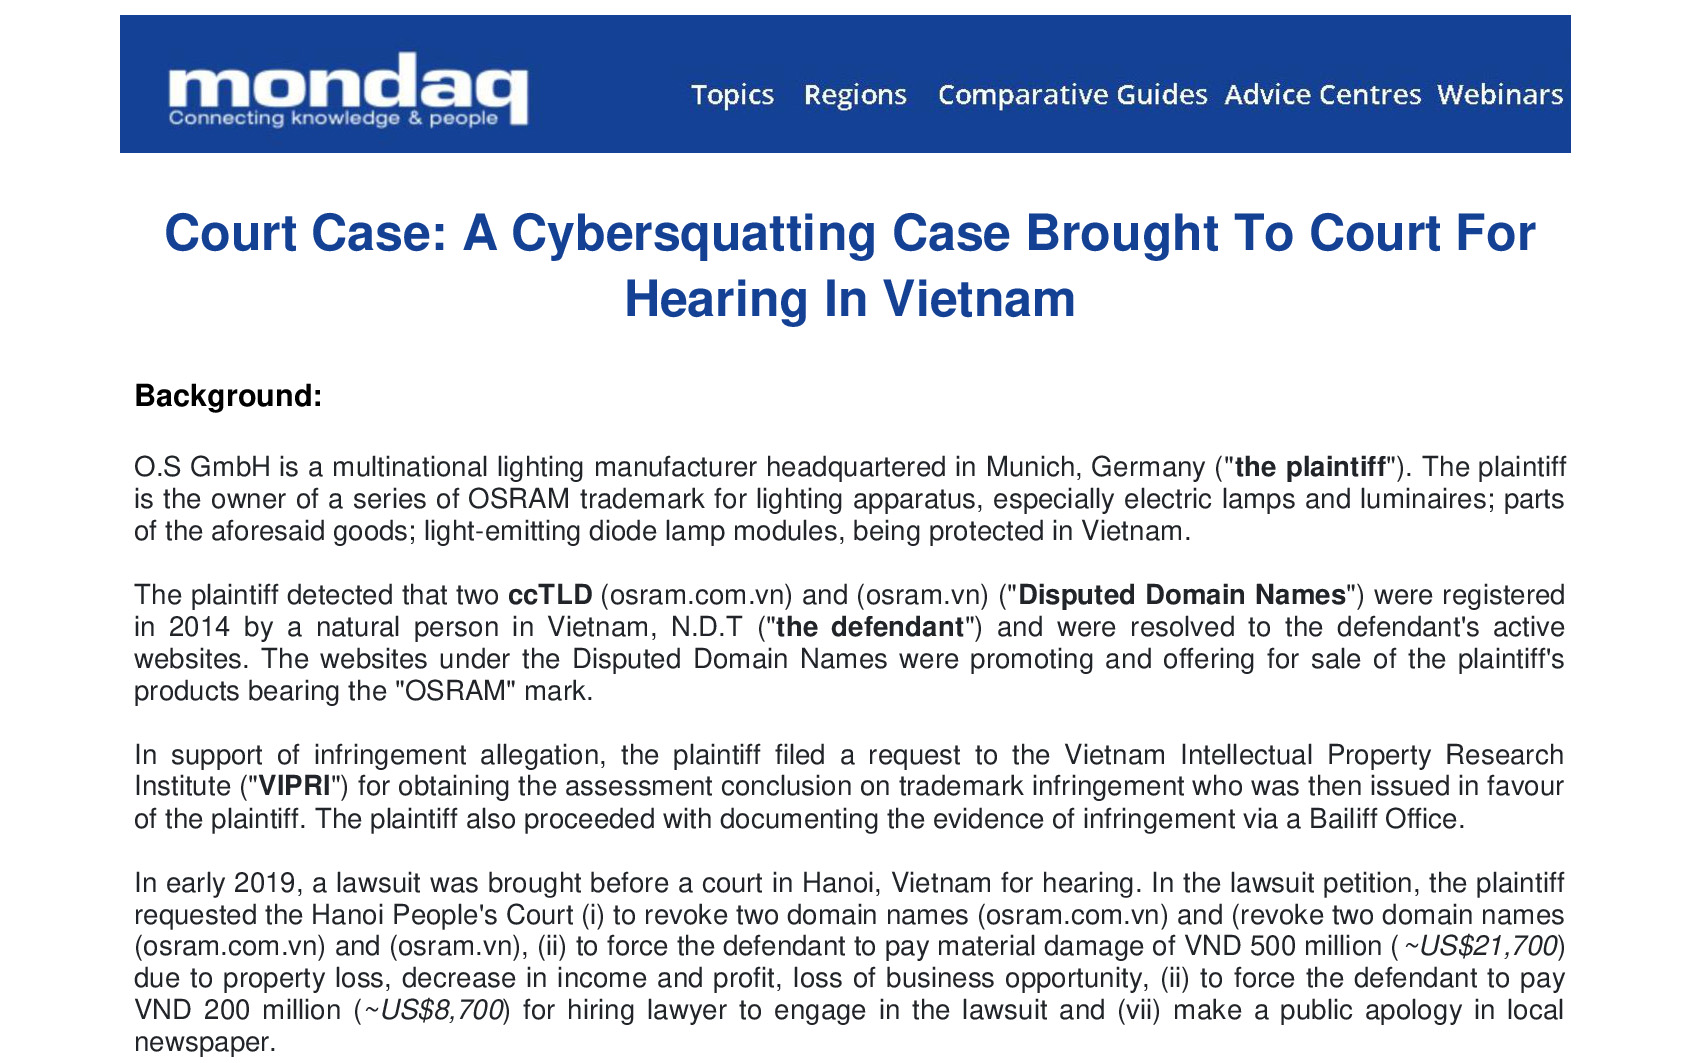 https://kenfoxlaw.com/wp-content/uploads/2021/09/Mondaq-A-Cybersquatting-Case-Brought-To-Court-For-Hearing-In-Vietnam.pdf